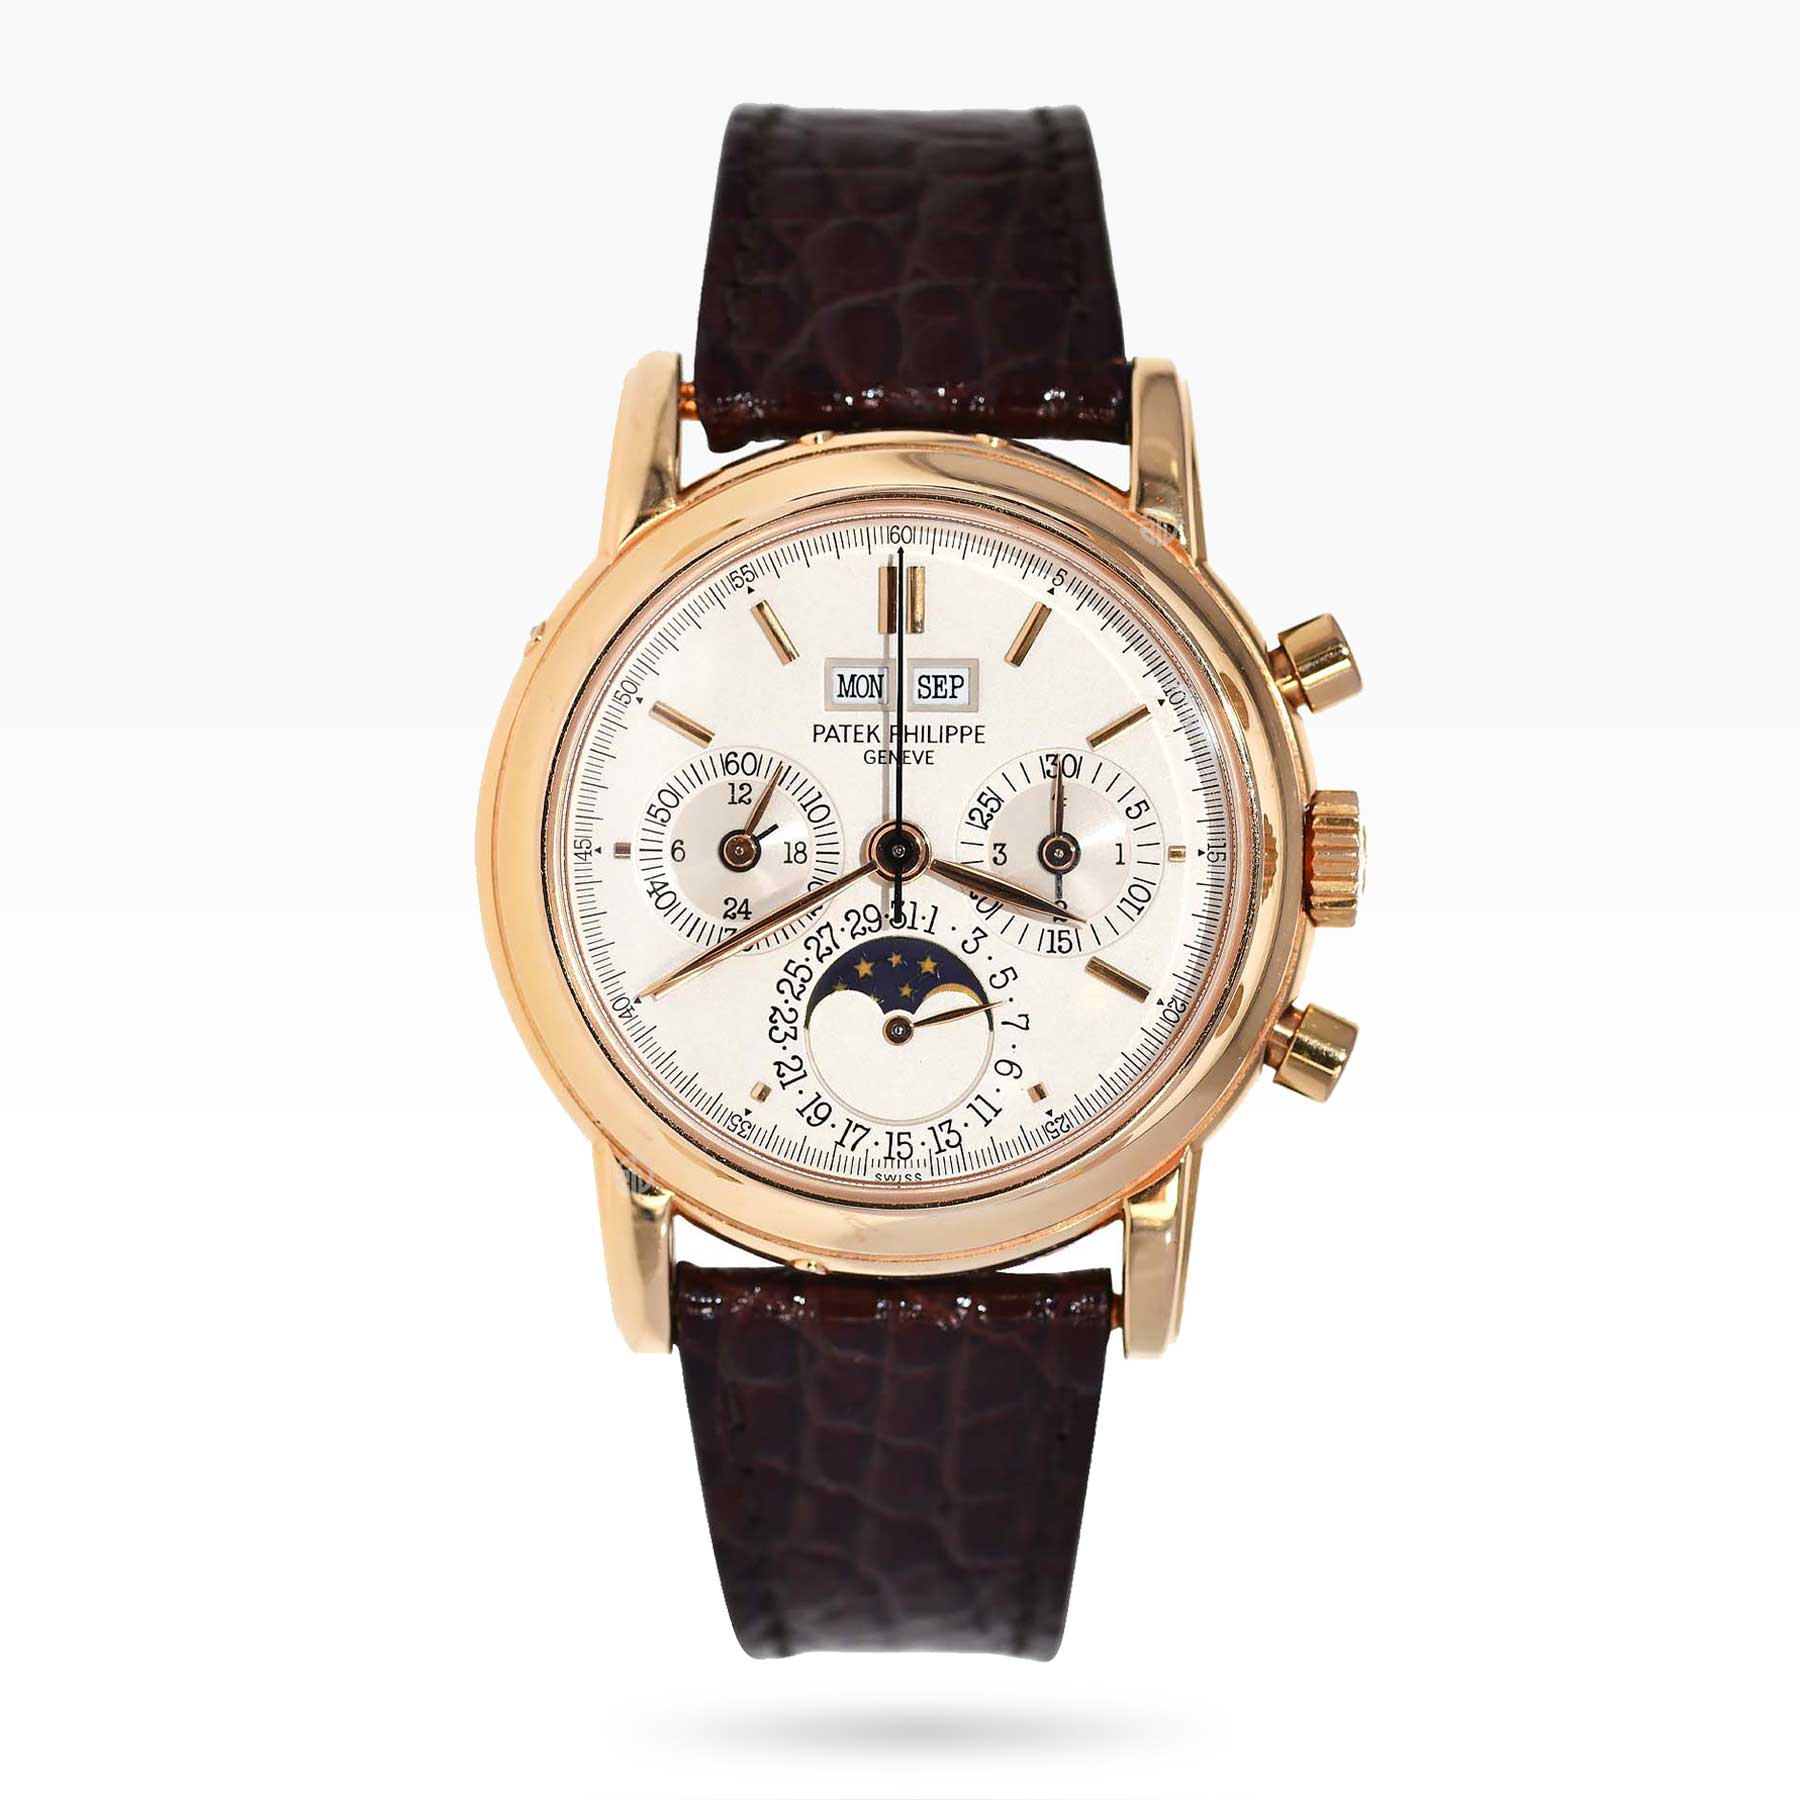 Vintage Patek Philippe Ref3970E Rose Gold Perpetual Calendar Chronograph from 1989 - 2ToneVintage Watches Singapore